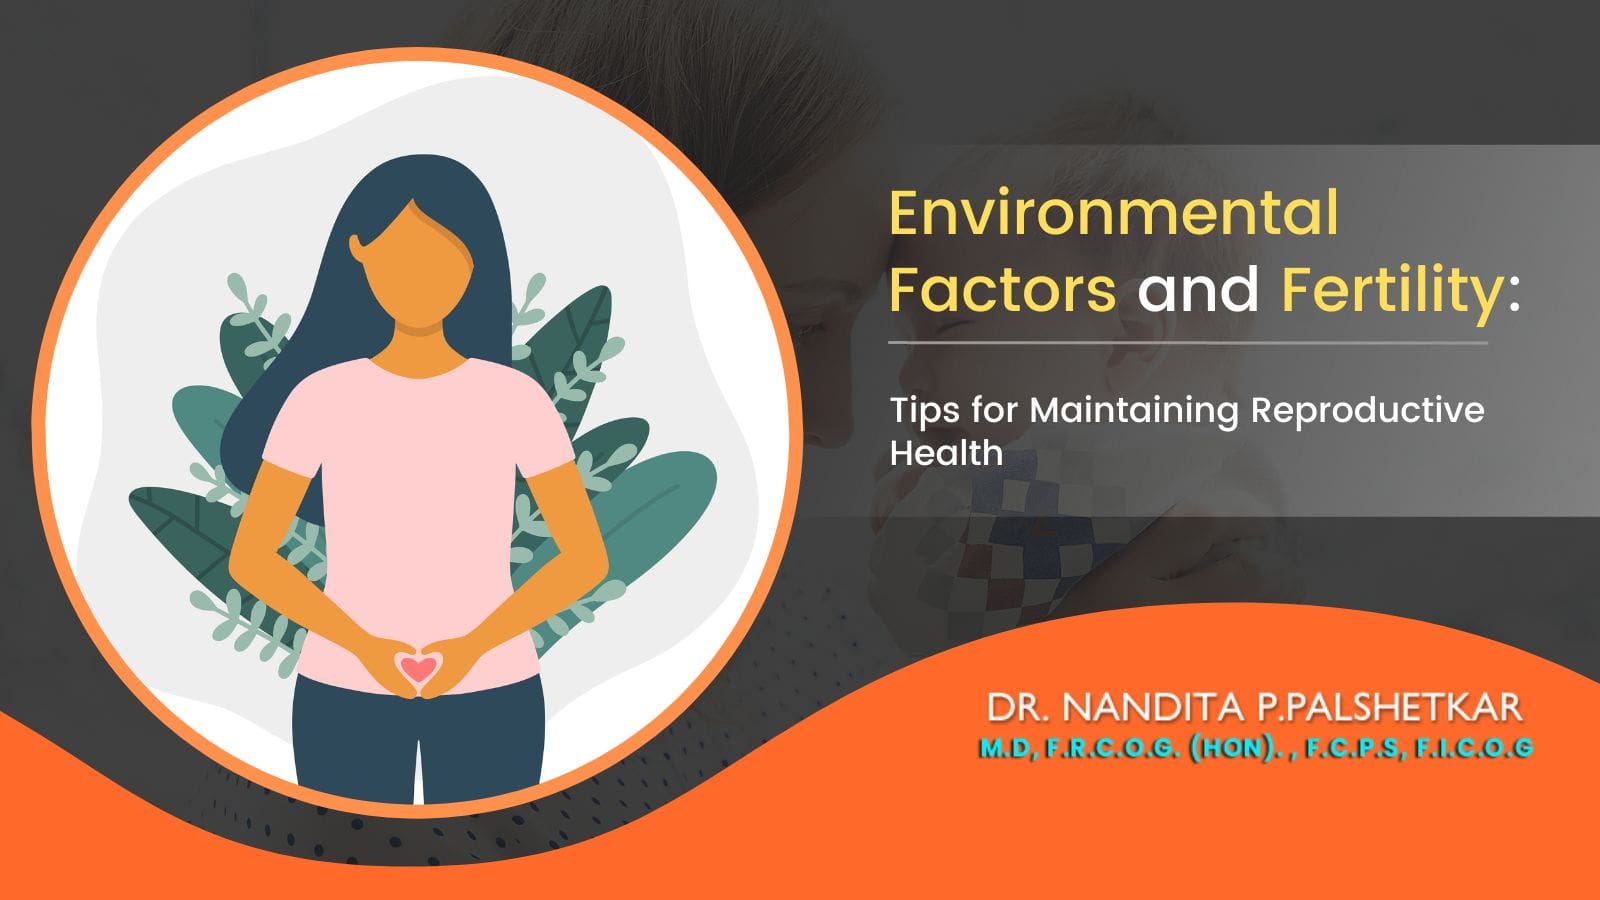 Environmental Factors and Fertility: Tips for Maintaining Reproductive Health